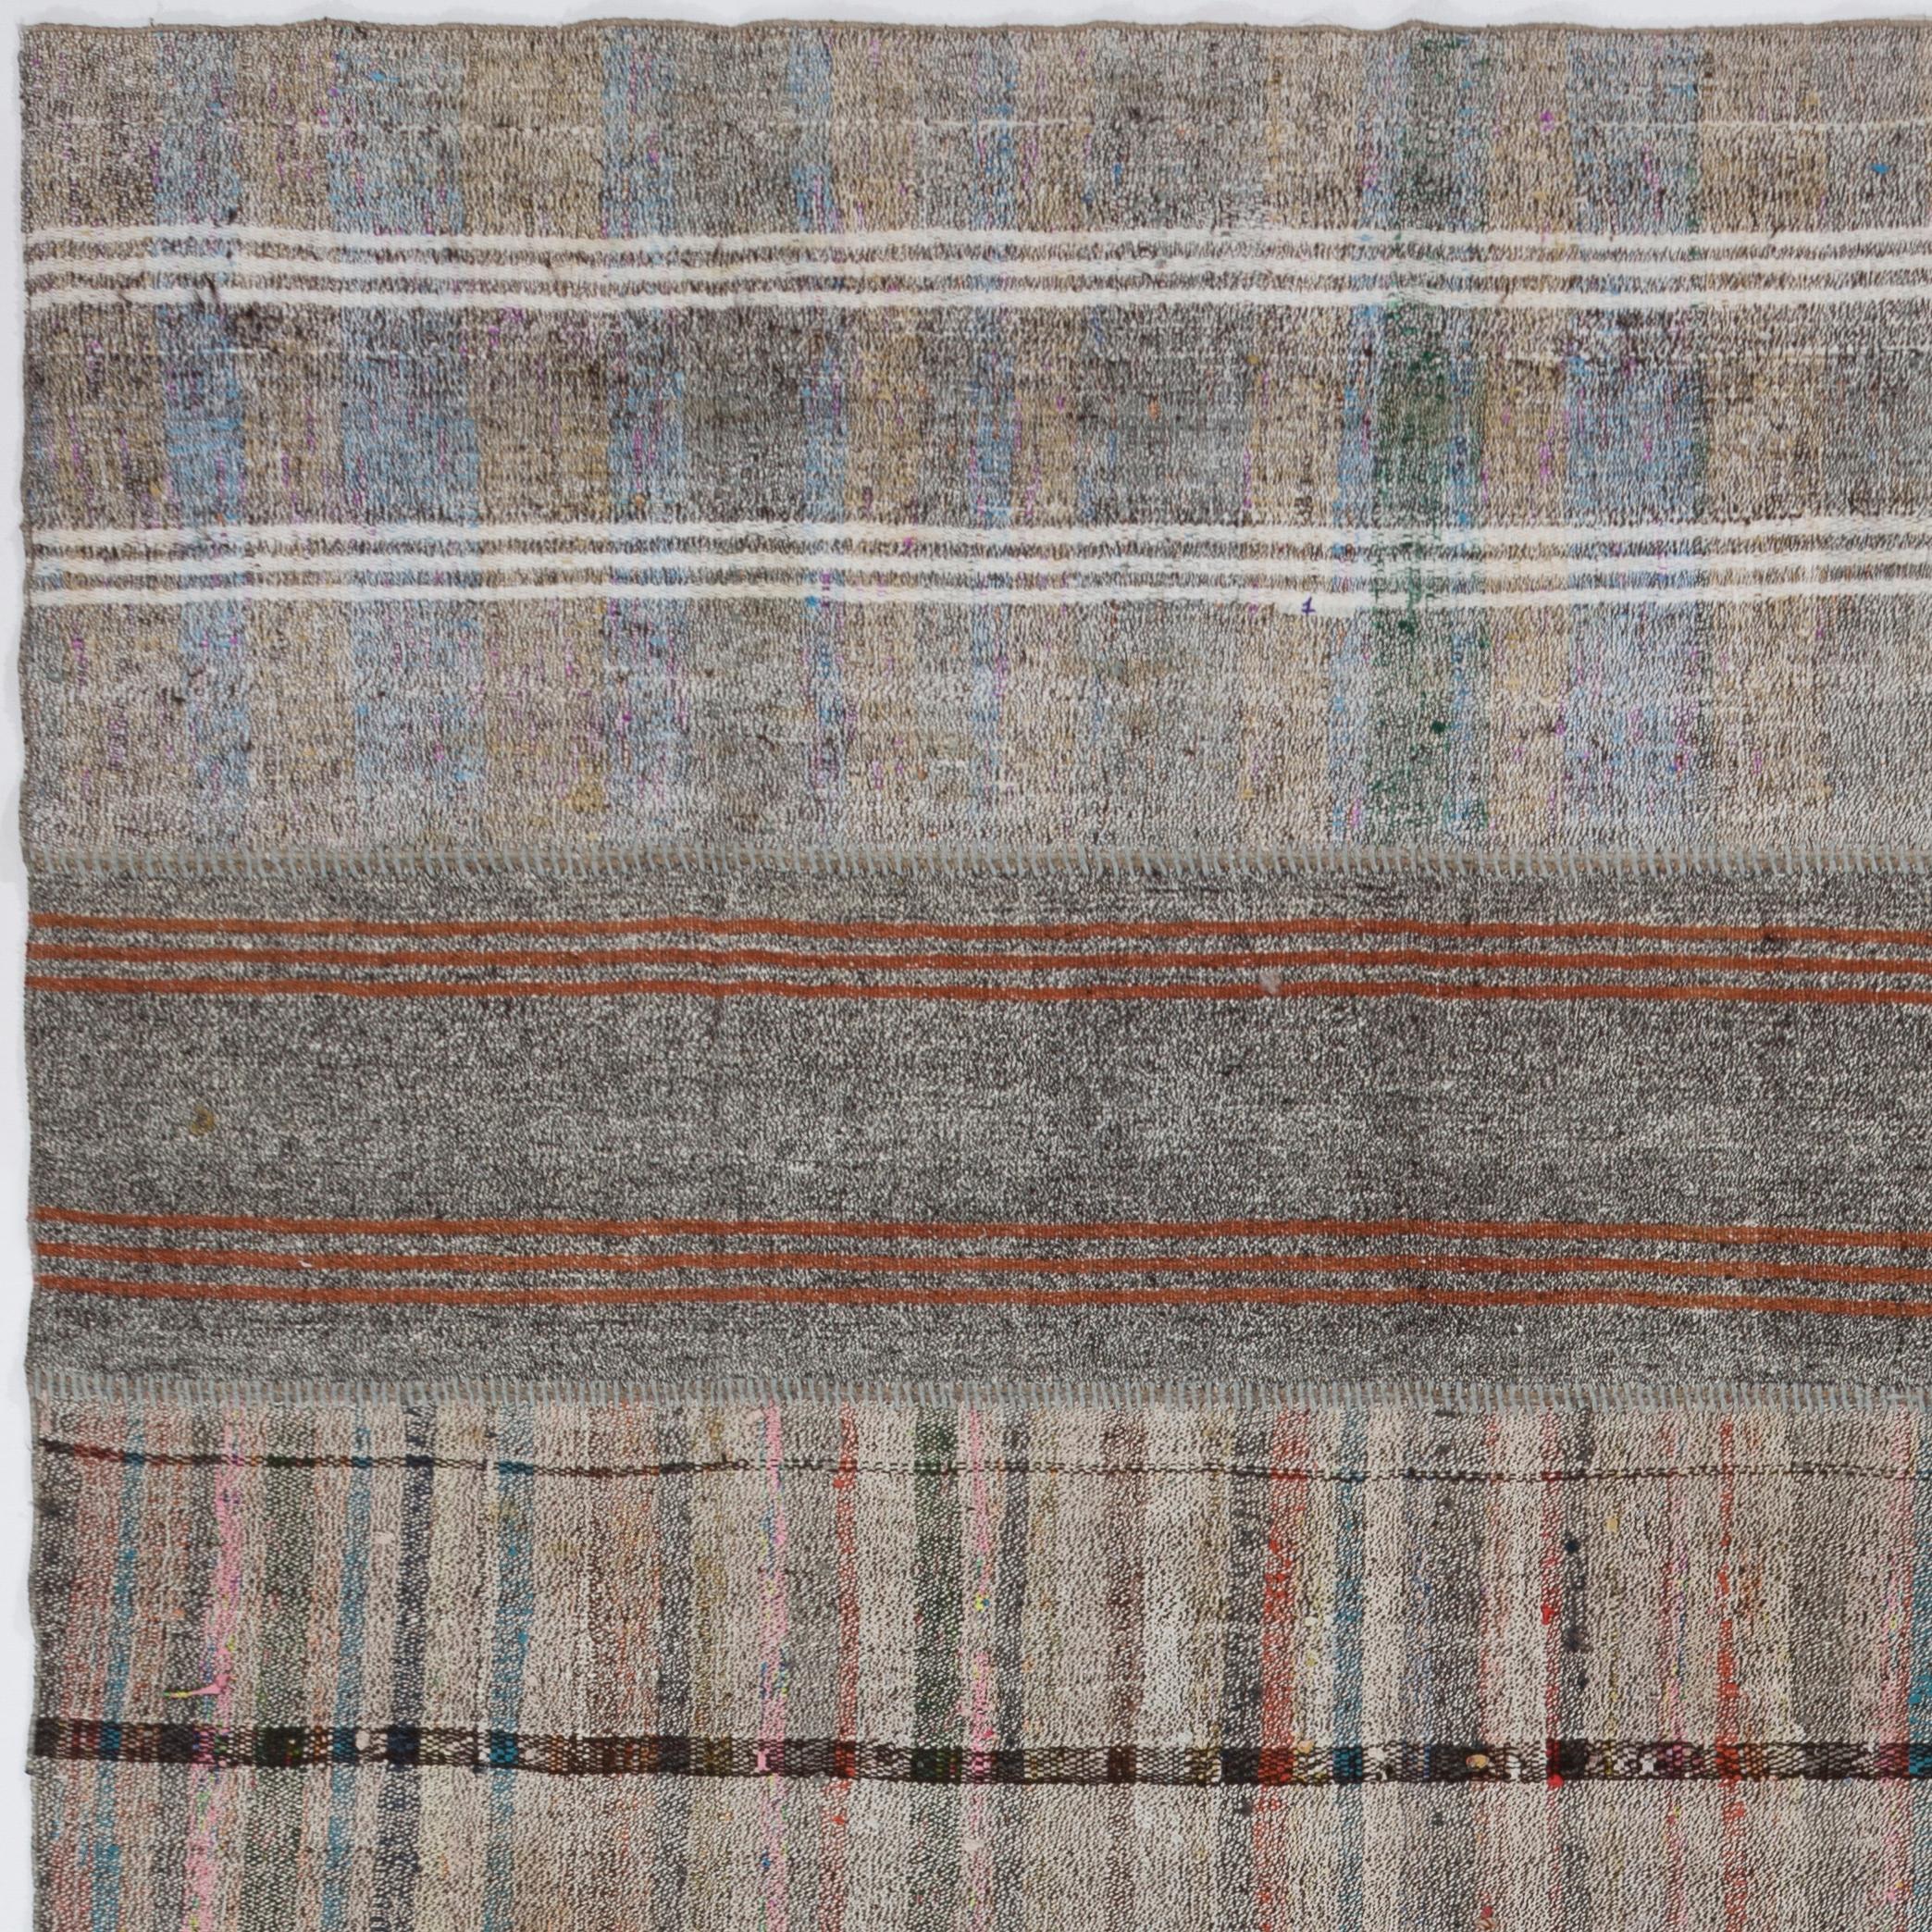 7.8x12.3 ft Vintage Nomadic Hand-Woven Cotton and Goat Hair Turkish Kilim Rug In Good Condition For Sale In Philadelphia, PA